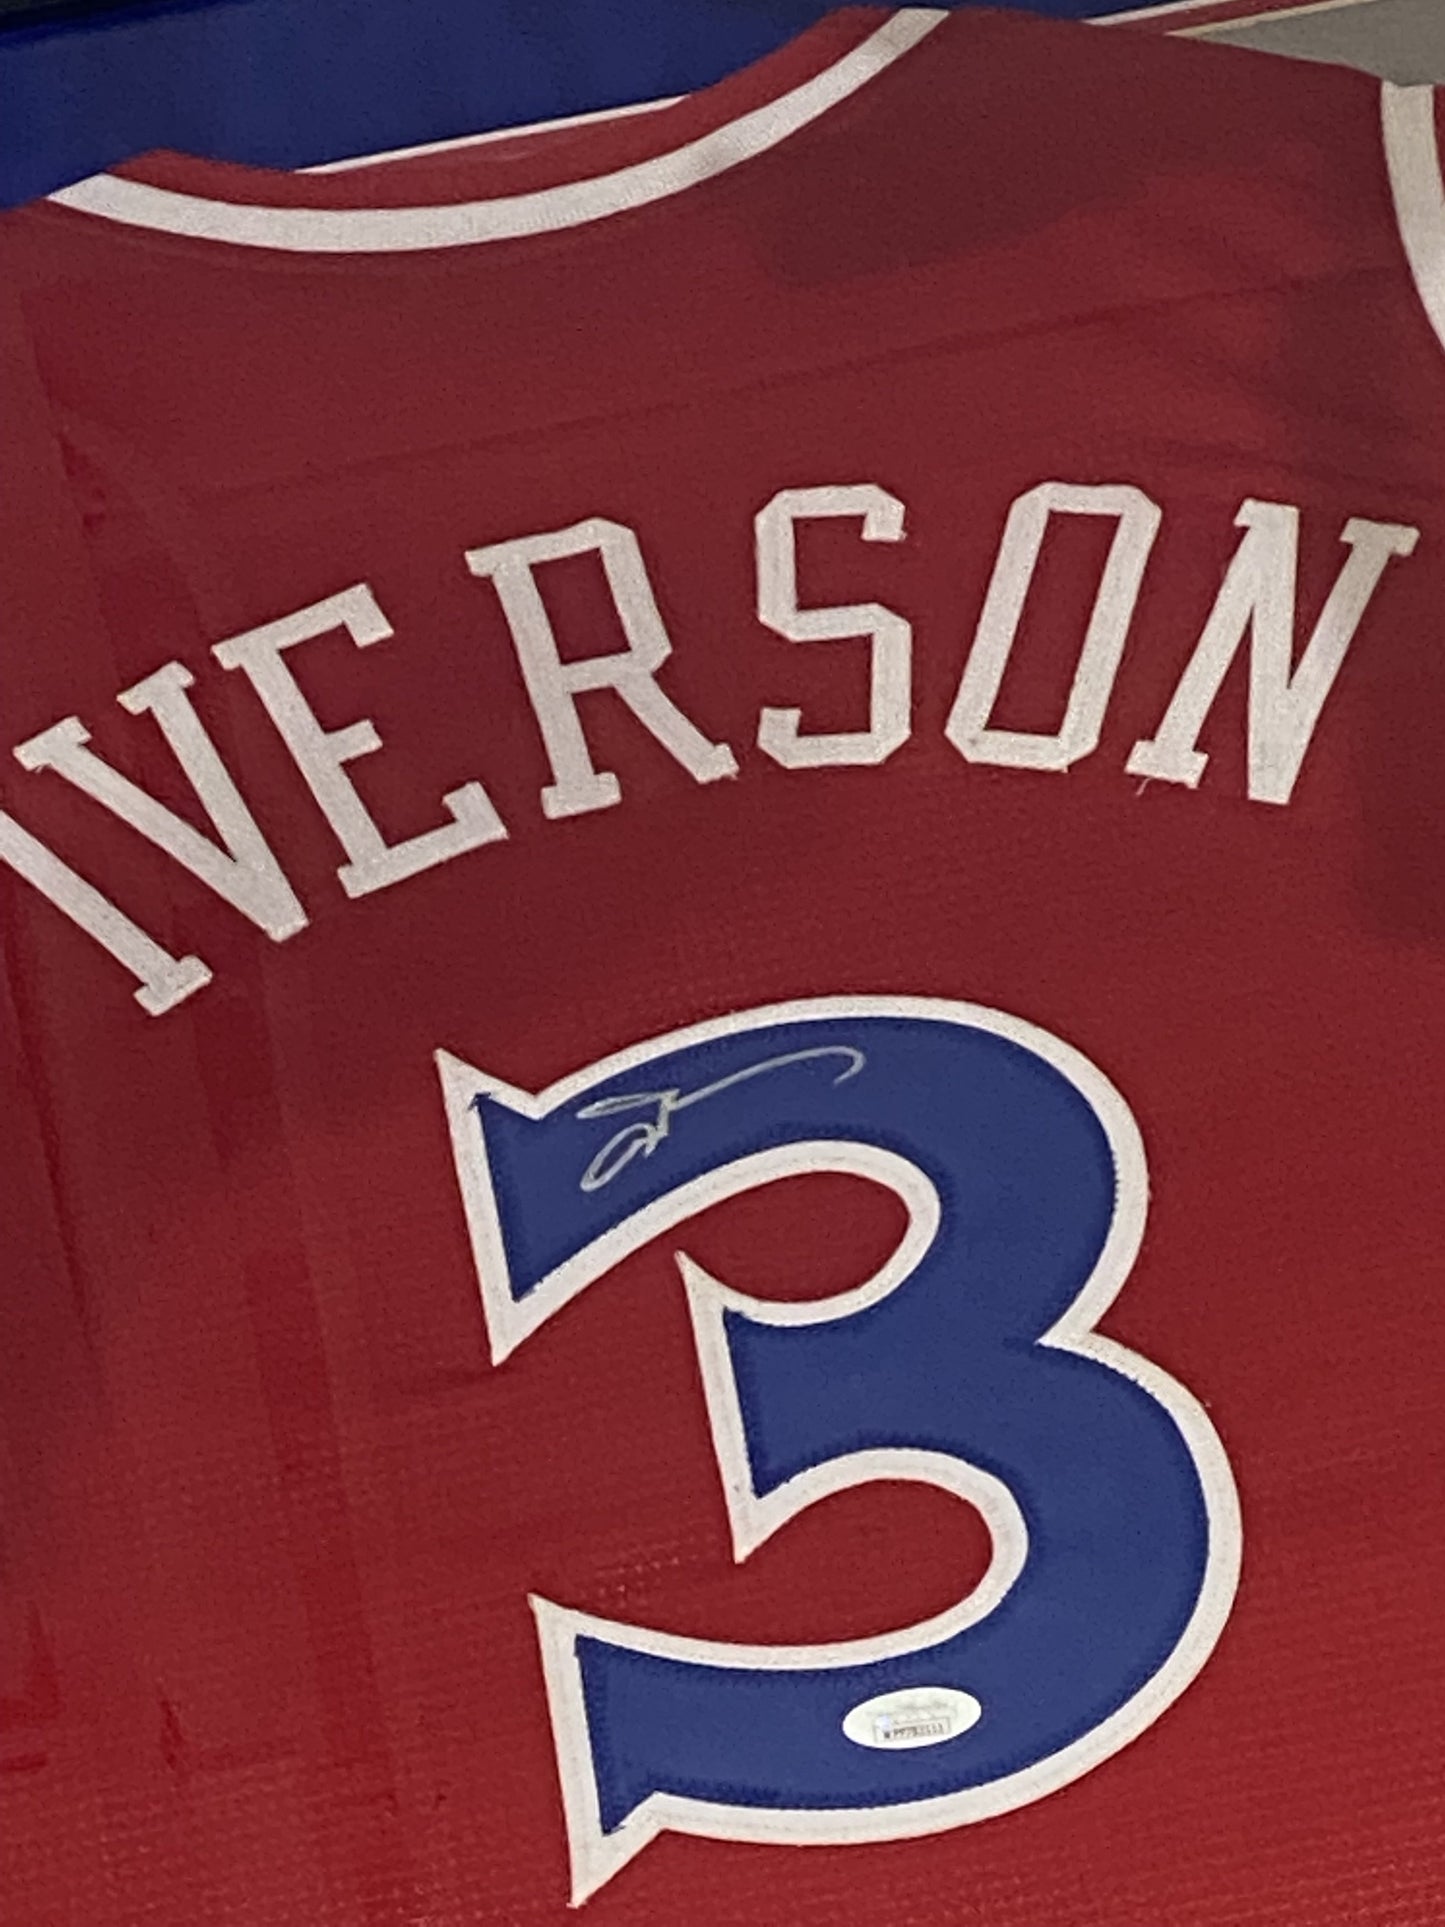 FRAMED Autographed/Signed ALLEN IVERSON 33x42 Philadelphia Sixers Red Jersey